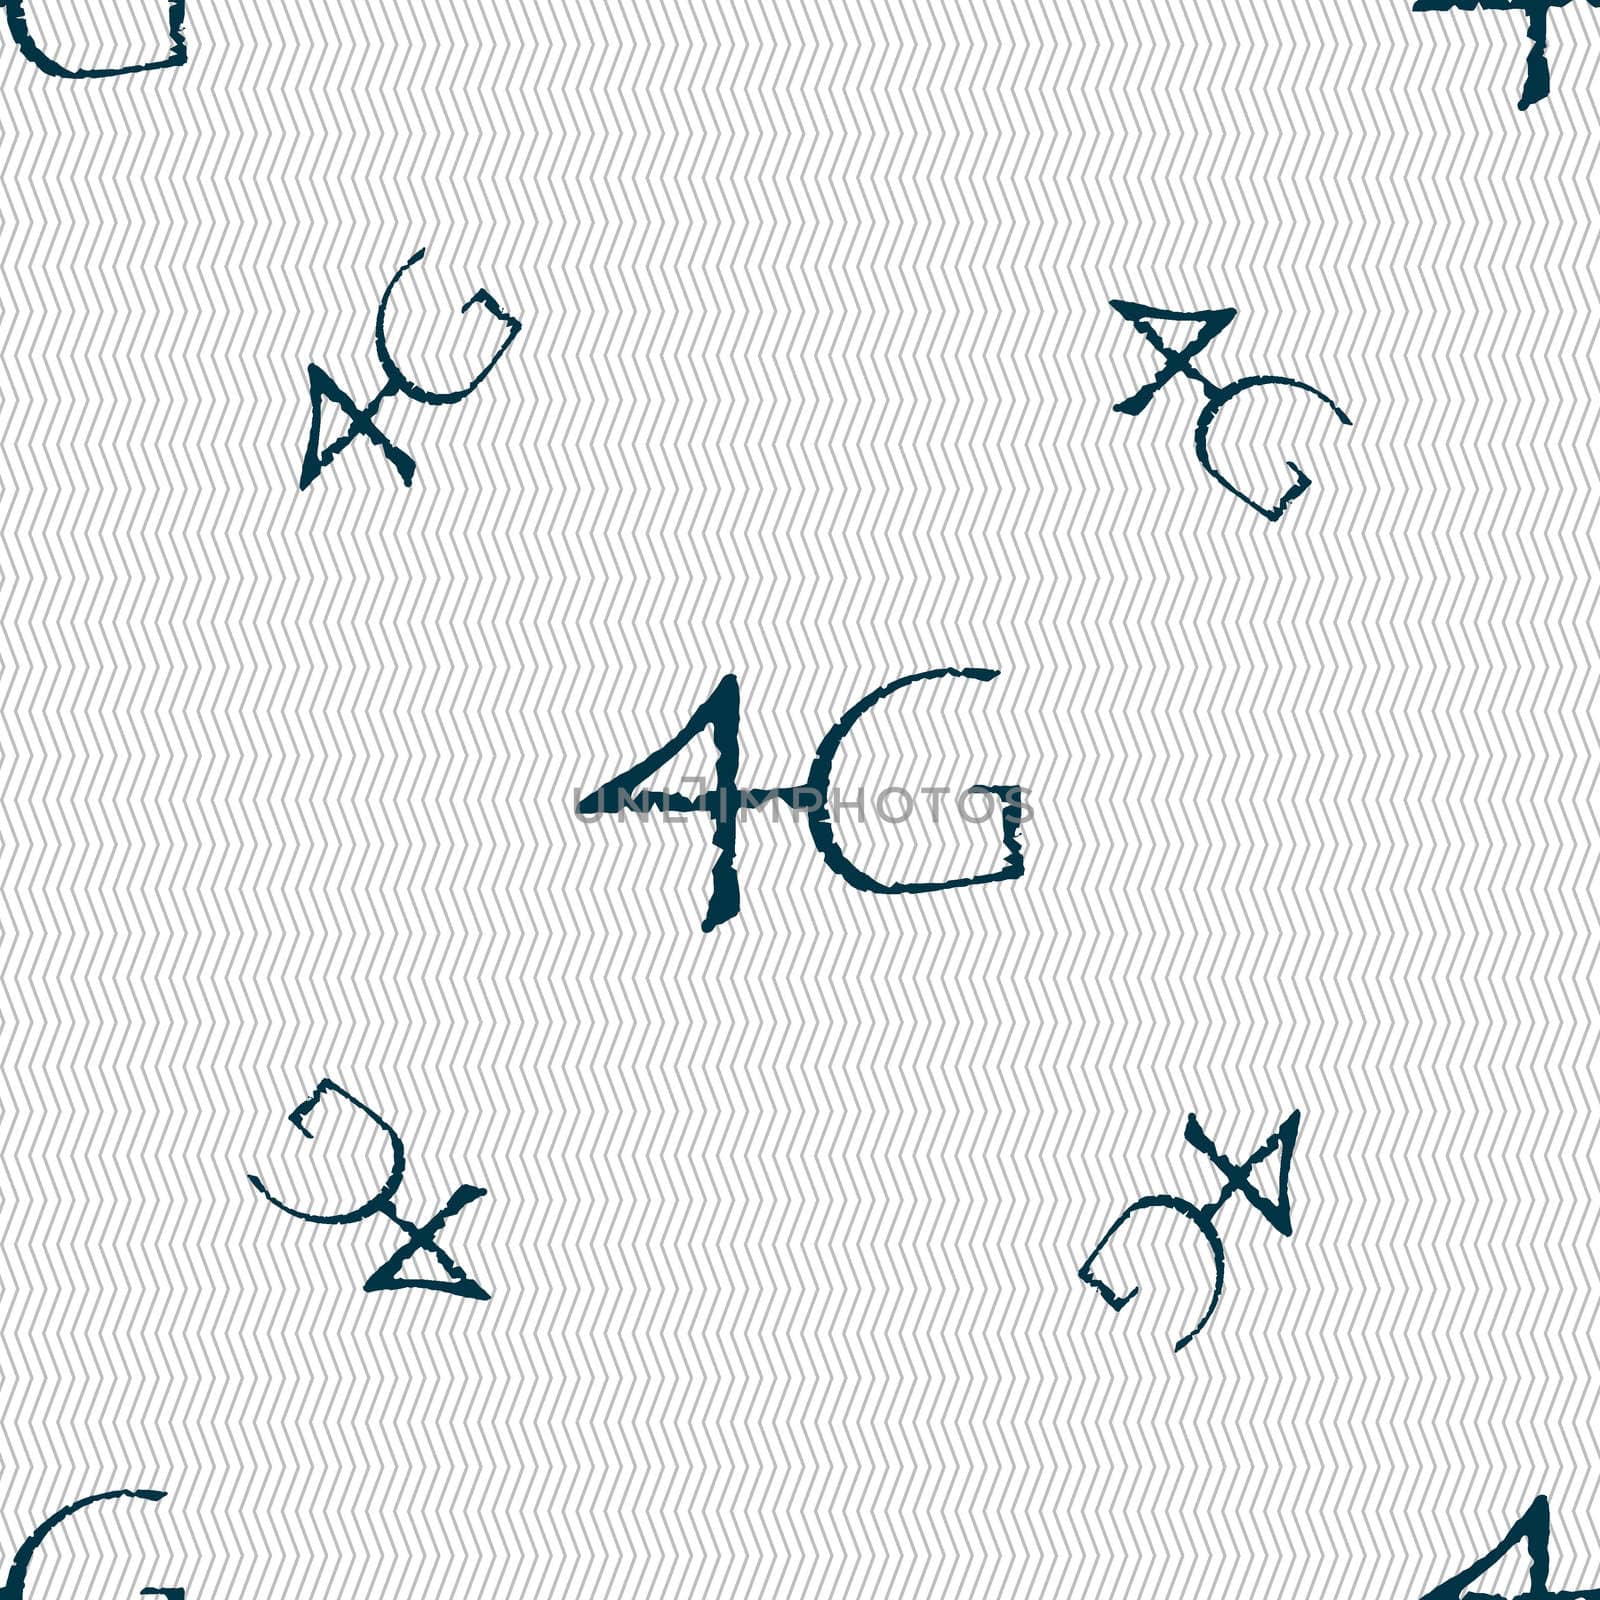 4G sign icon. Mobile telecommunications technology symbol. Seamless pattern with geometric texture. illustration